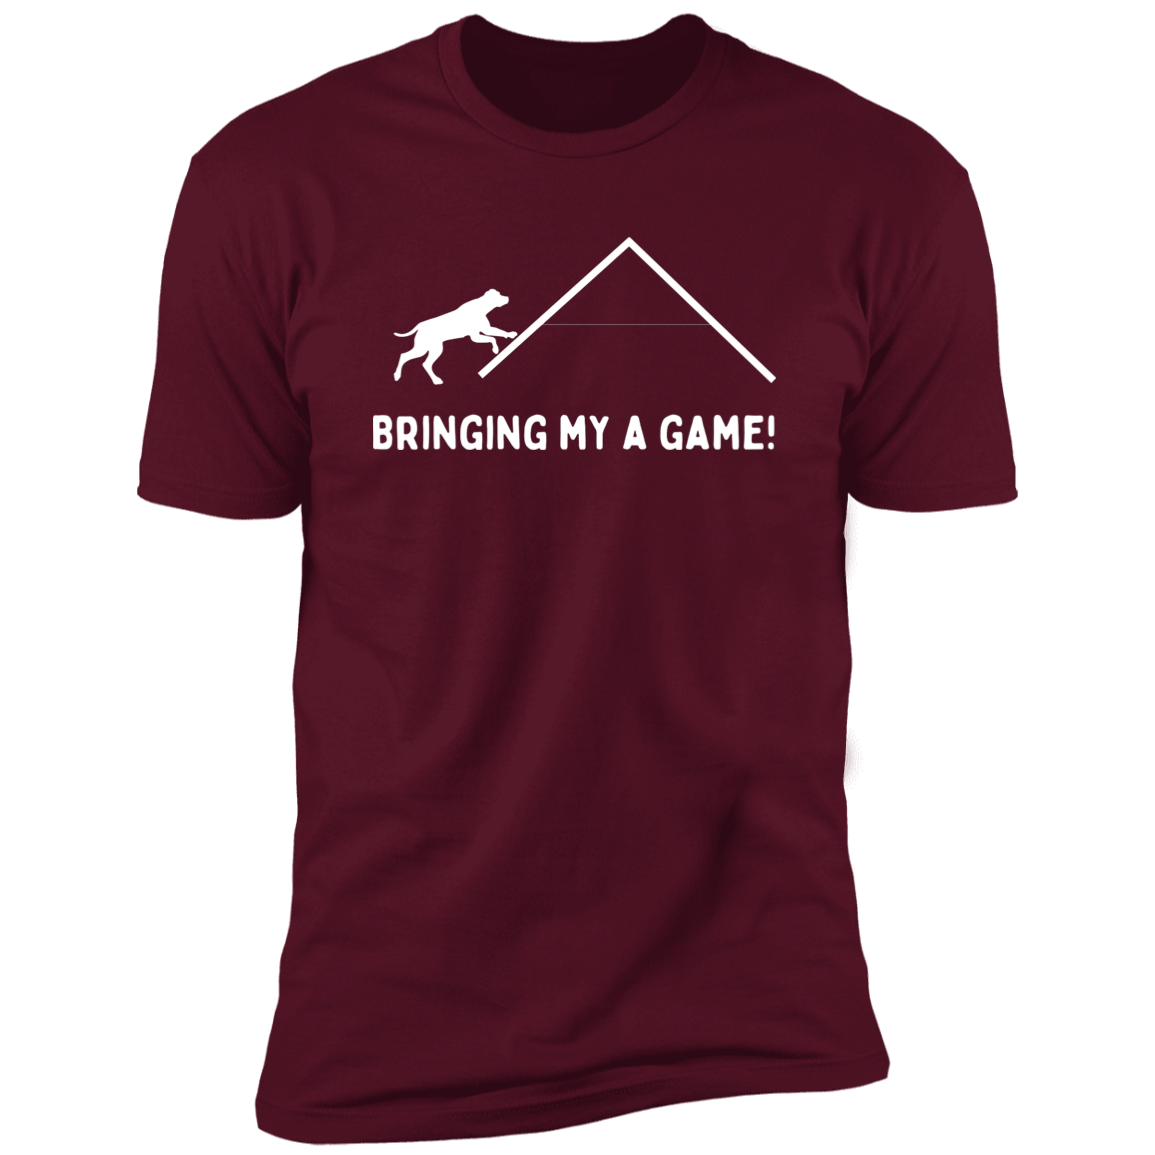 Bringing My A Game Agility T-shirt, Dog Agility Shirt for humans, in maroon